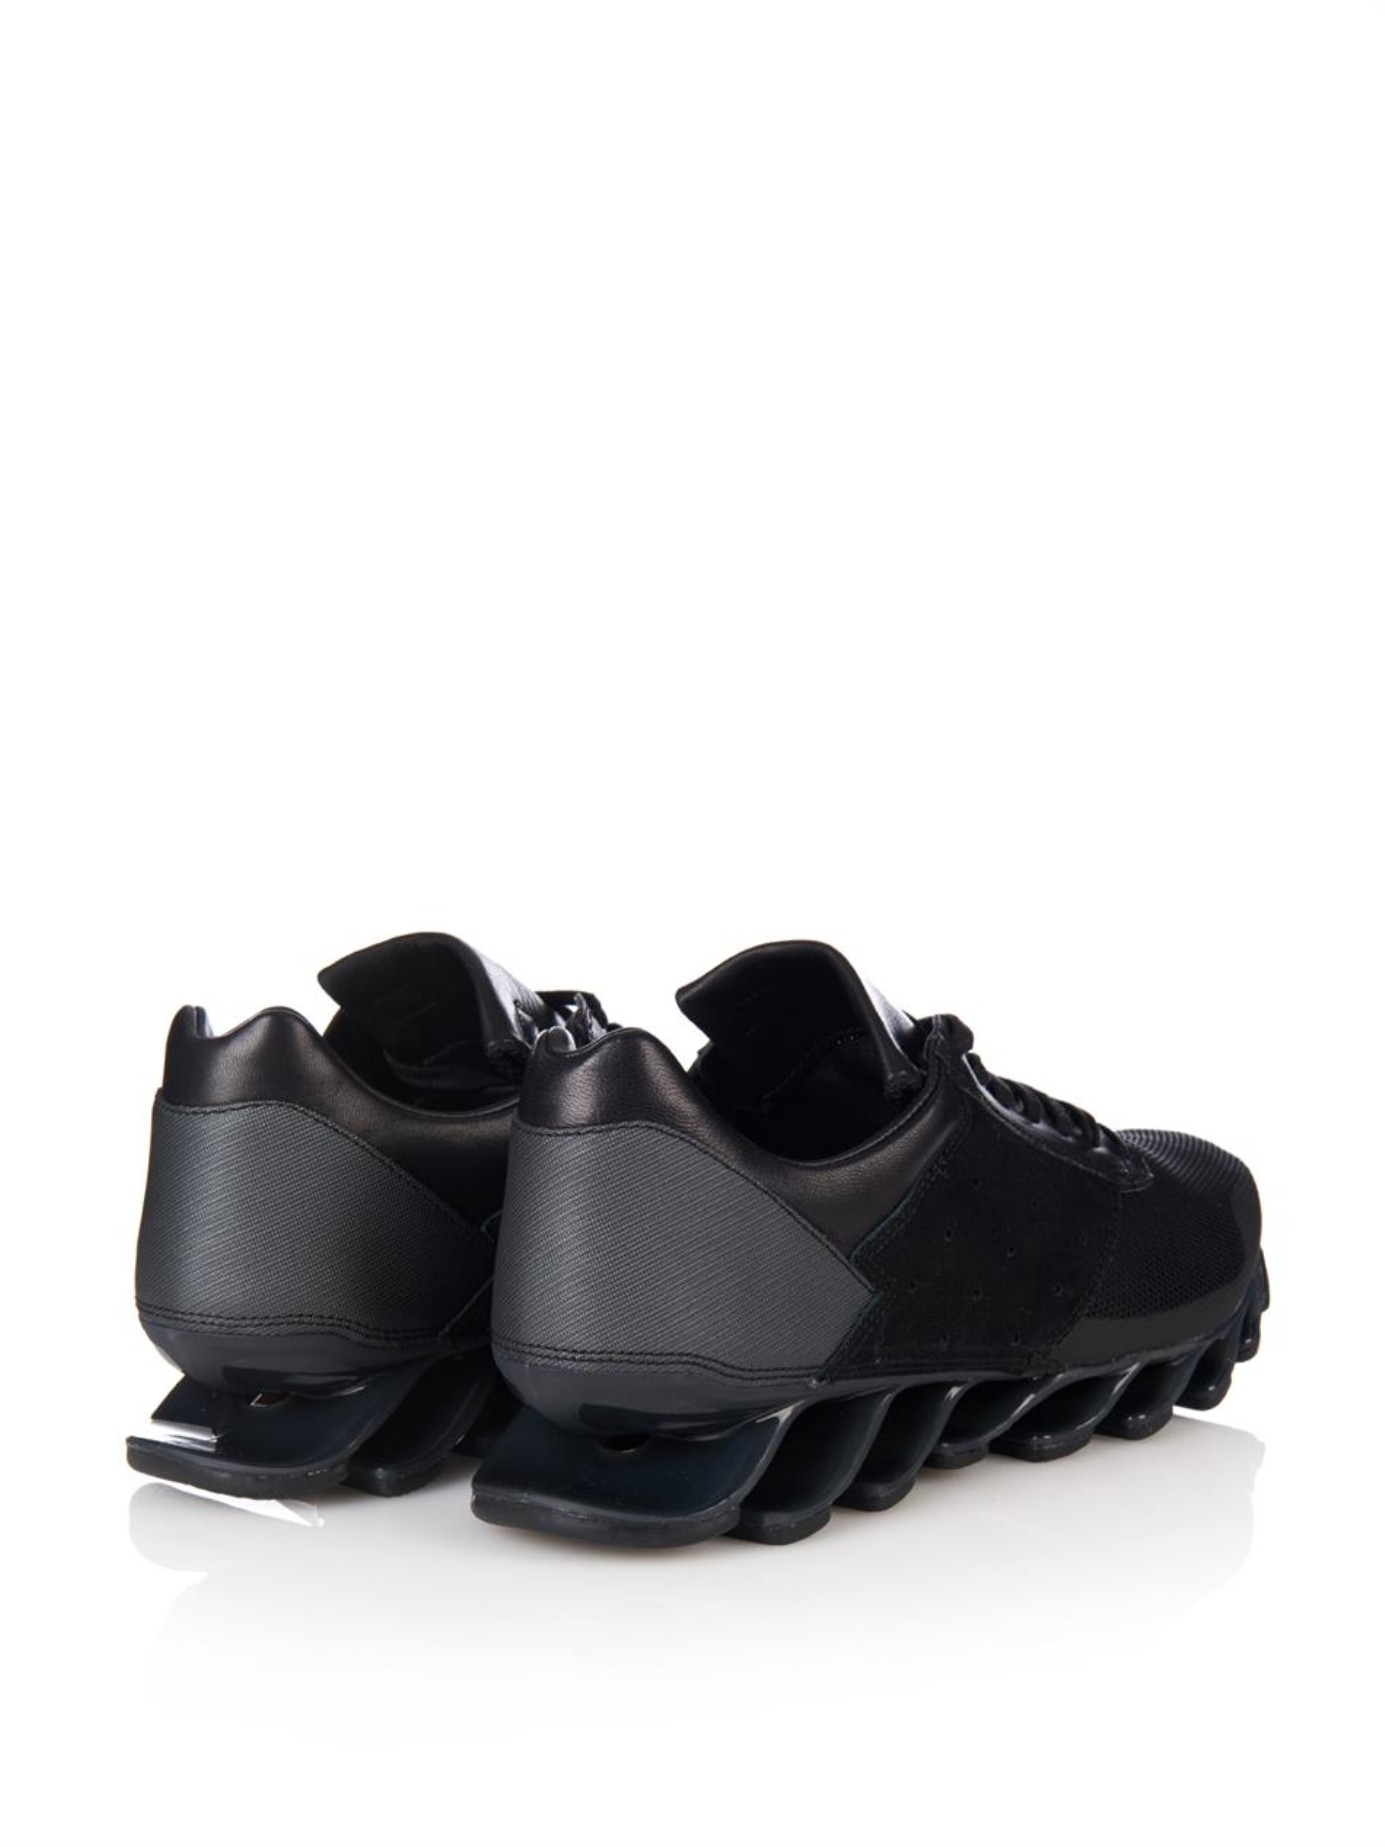 Rick Owens X Adidas Springblade Trainers in Black for Men | Lyst